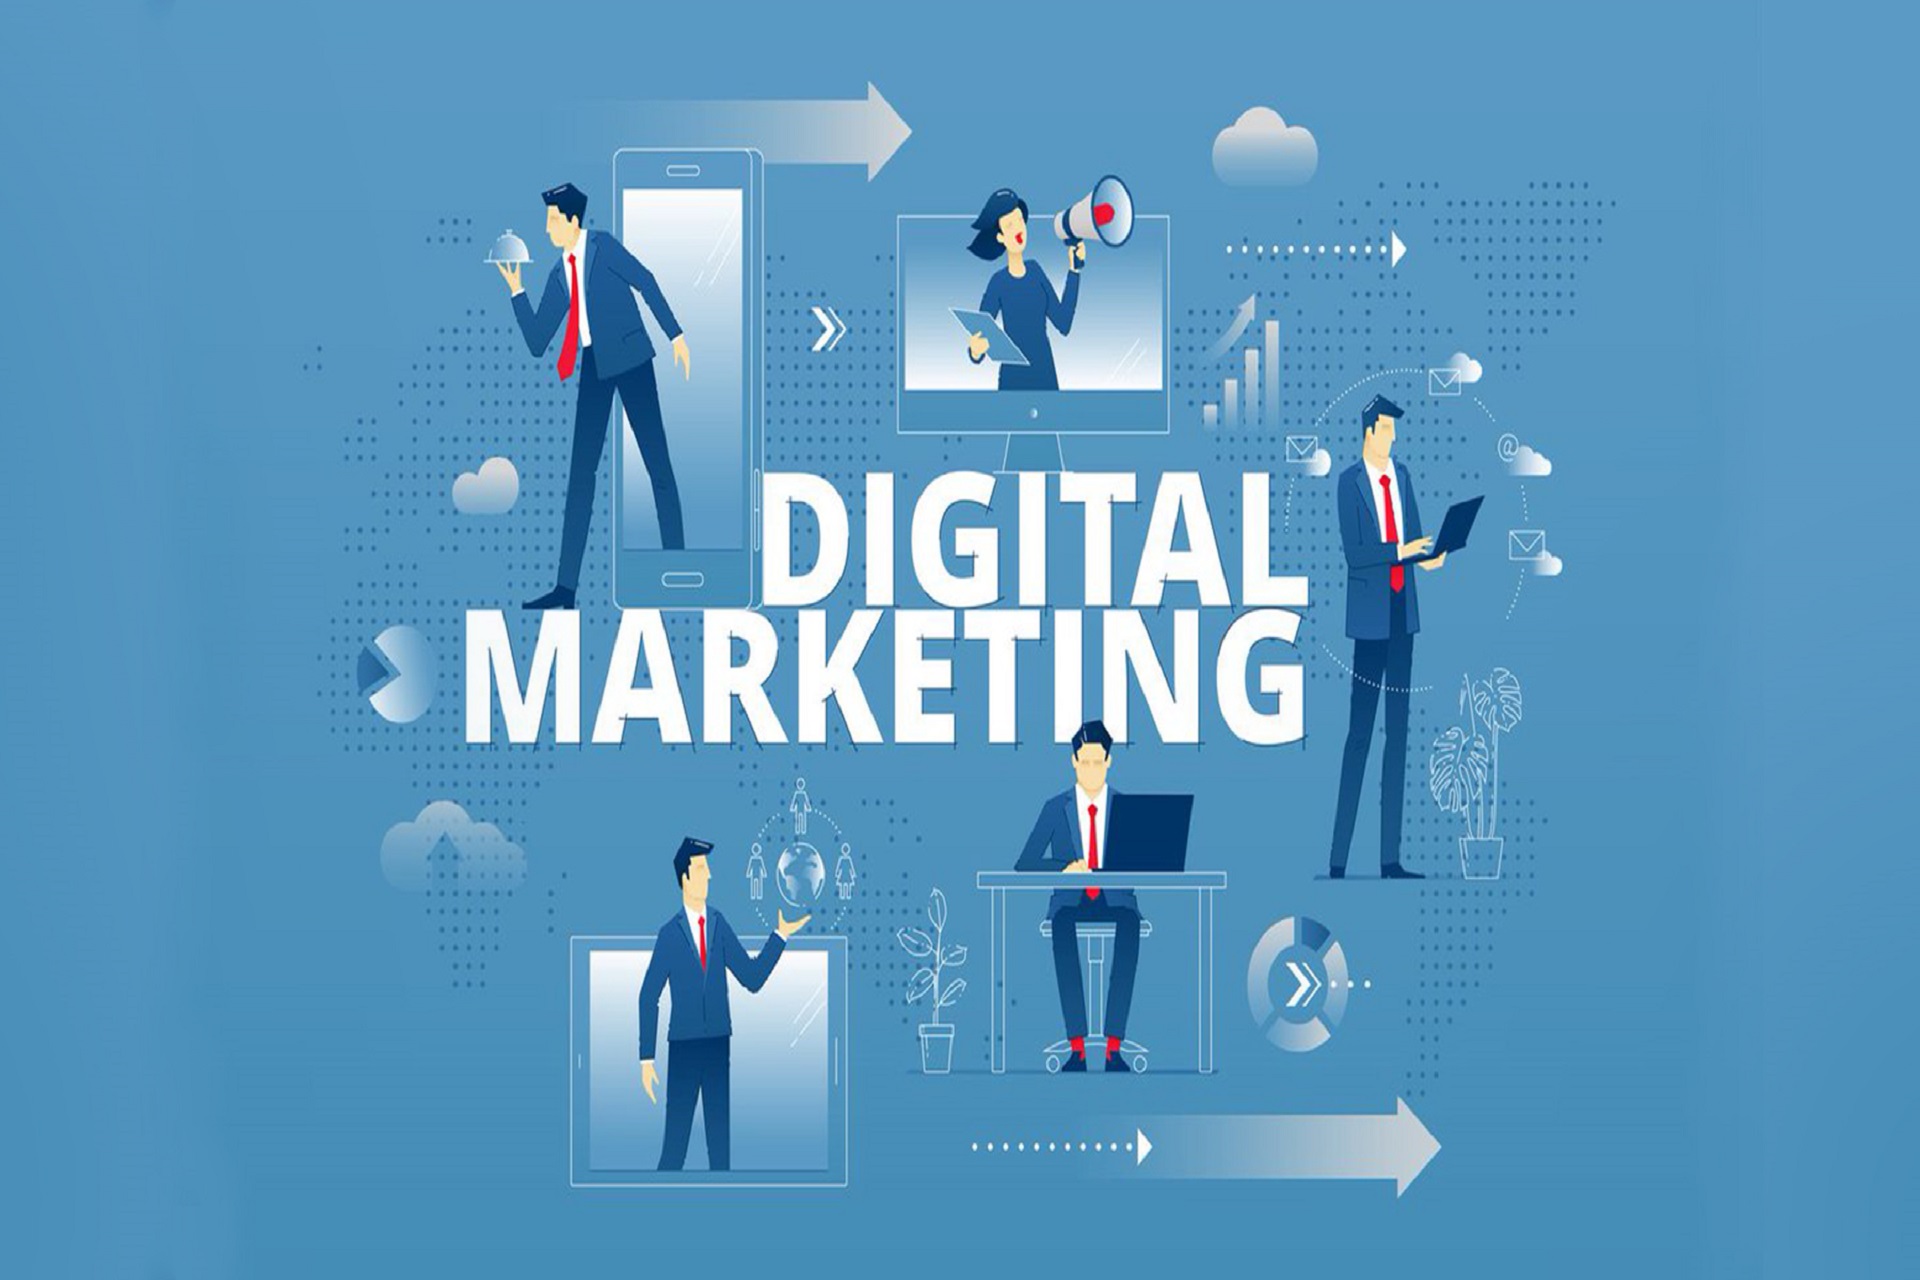 11 Reasons Why Digital Marketing Is Important for Your Business